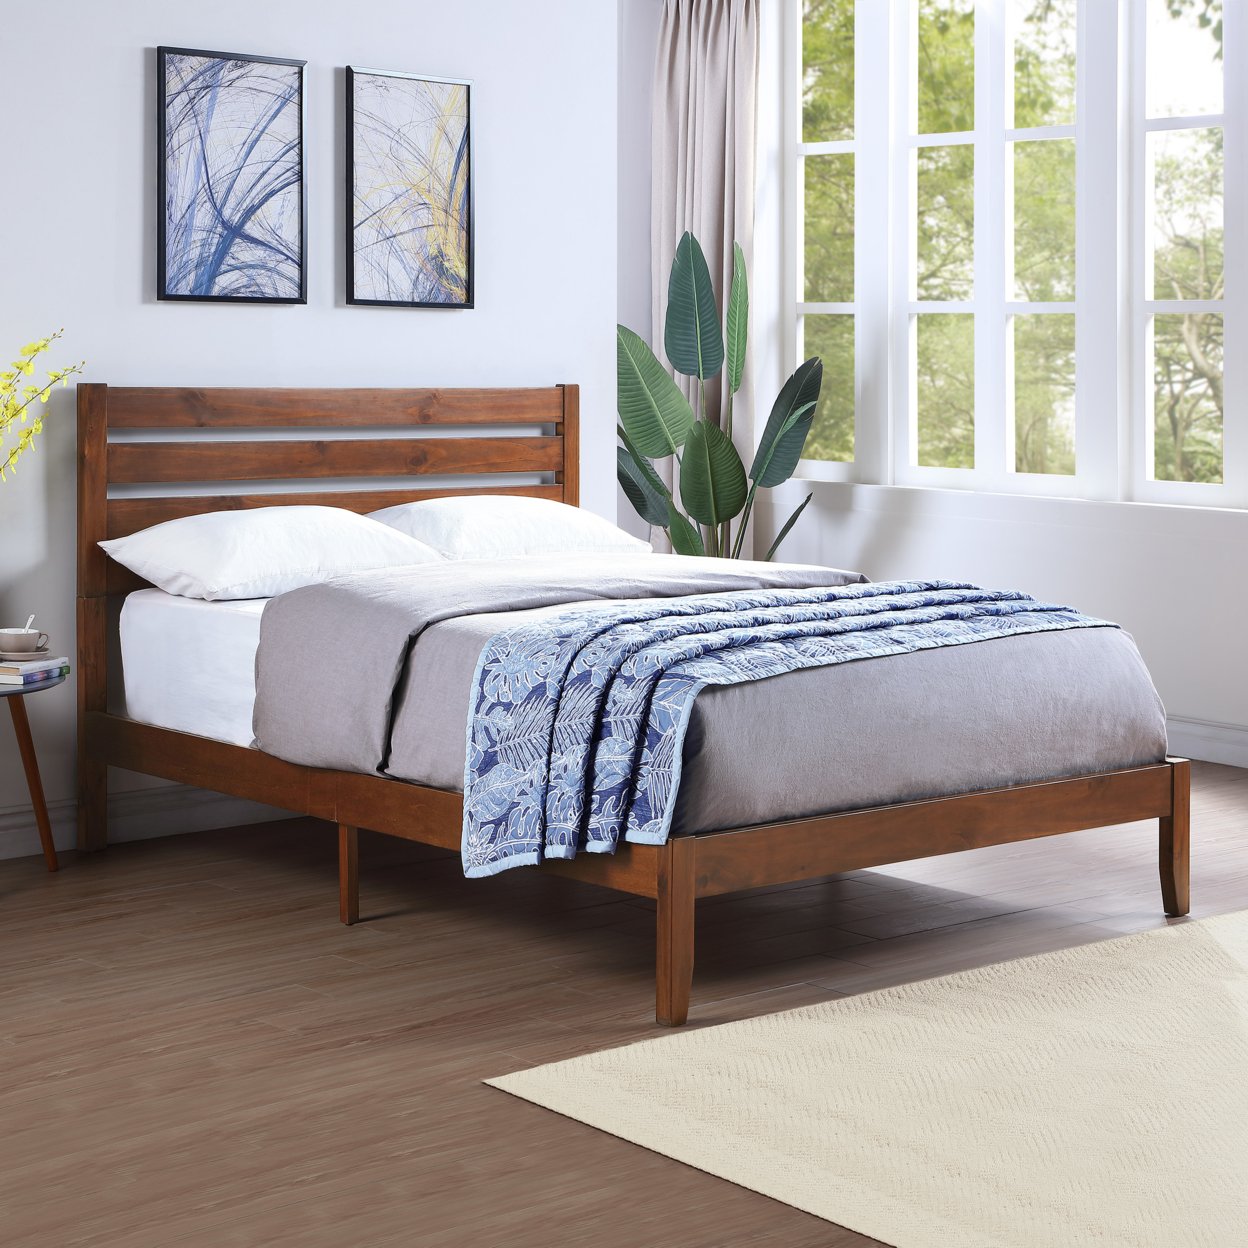 Kenley Queen Size Bed With Headboard - White Finish + Natural